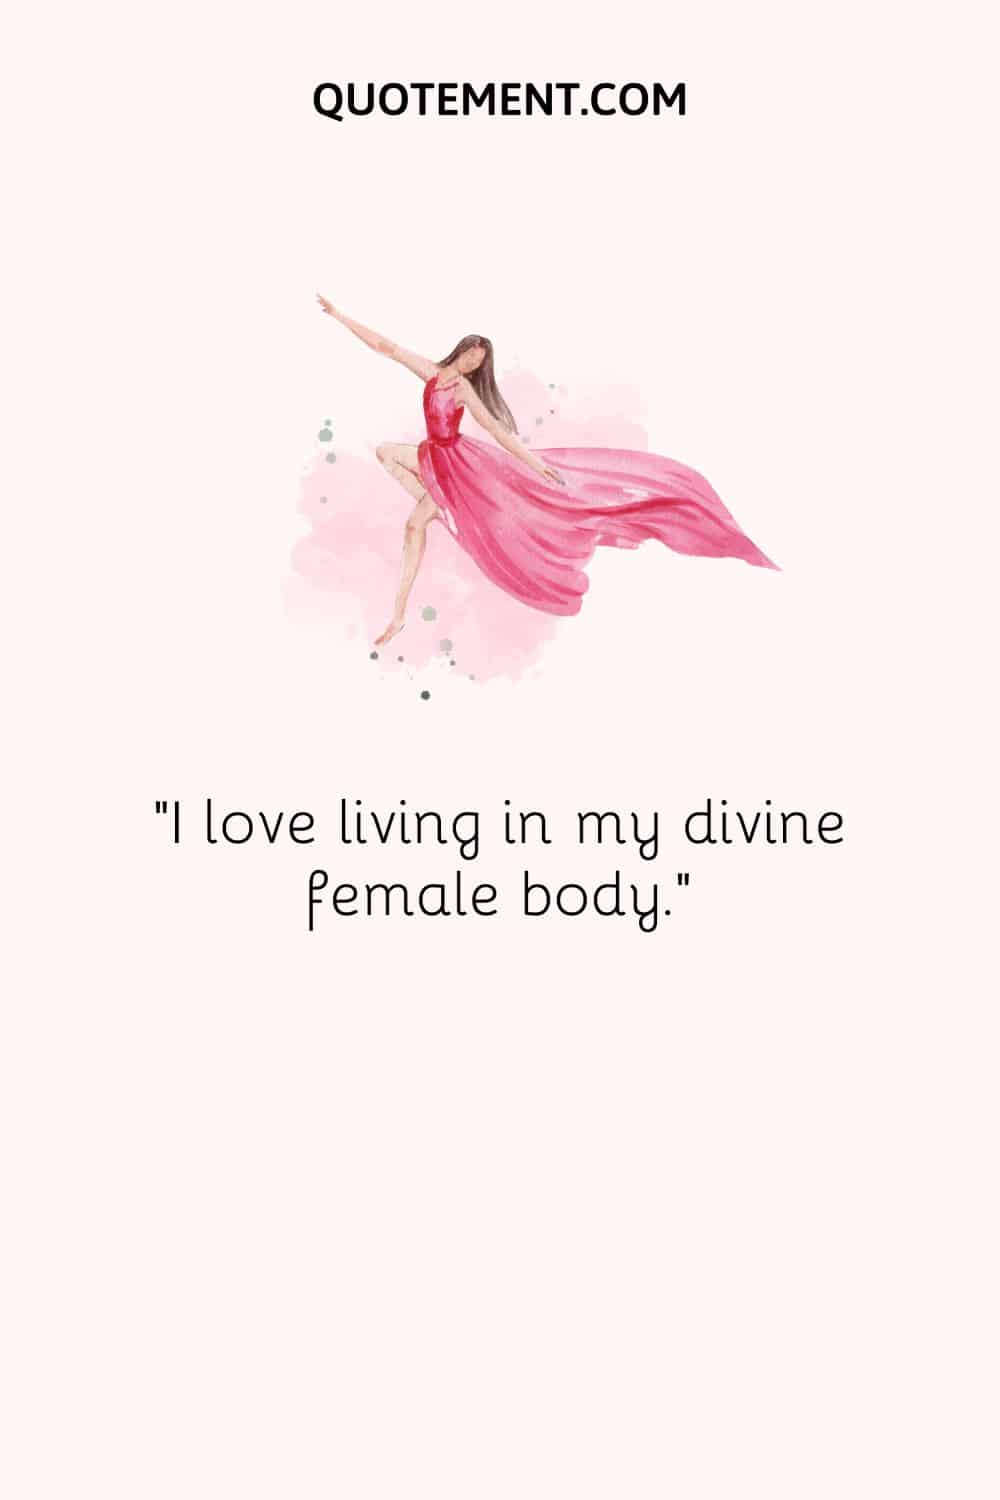 Best daily affirmation for women and a lady dancing.